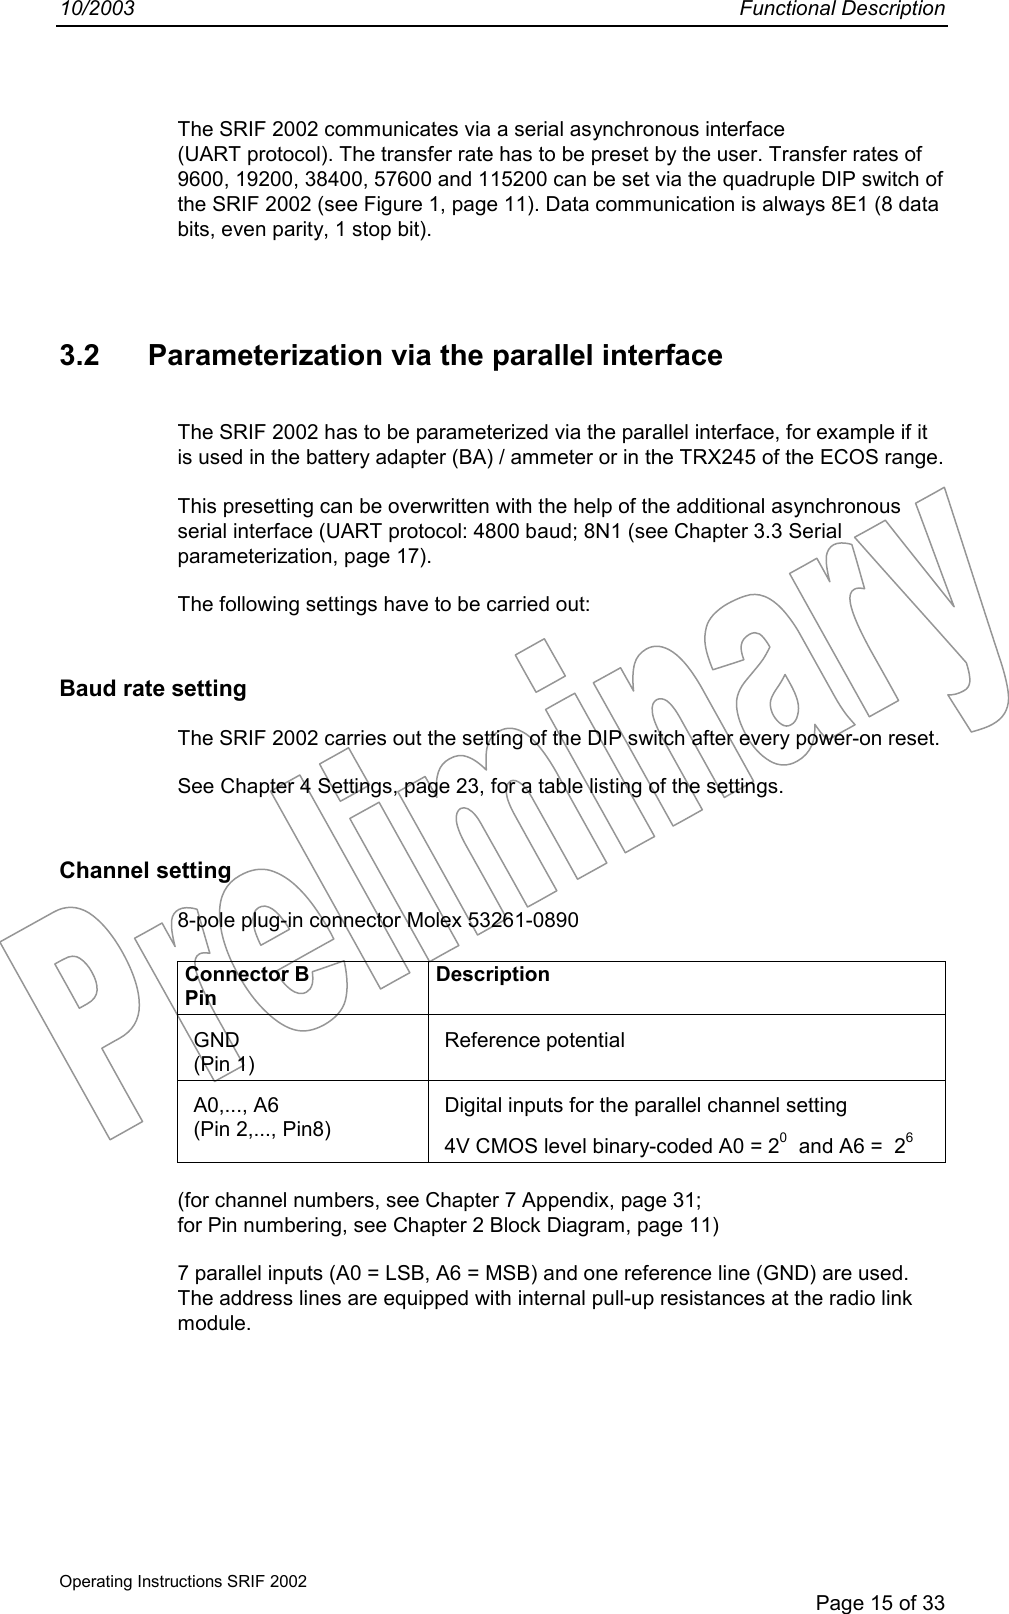 10/2003 Functional DescriptionOperating Instructions SRIF 2002Page 15 of 33The SRIF 2002 communicates via a serial asynchronous interface(UART protocol). The transfer rate has to be preset by the user. Transfer rates of9600, 19200, 38400, 57600 and 115200 can be set via the quadruple DIP switch ofthe SRIF 2002 (see Figure 1, page 11). Data communication is always 8E1 (8 databits, even parity, 1 stop bit).3.2 Parameterization via the parallel interfaceThe SRIF 2002 has to be parameterized via the parallel interface, for example if itis used in the battery adapter (BA) / ammeter or in the TRX245 of the ECOS range.This presetting can be overwritten with the help of the additional asynchronousserial interface (UART protocol: 4800 baud; 8N1 (see Chapter 3.3 Serialparameterization, page 17).The following settings have to be carried out:Baud rate settingThe SRIF 2002 carries out the setting of the DIP switch after every power-on reset.See Chapter 4 Settings, page 23, for a table listing of the settings.Channel setting8-pole plug-in connector Molex 53261-0890Connector BPinDescriptionGND(Pin 1)Reference potentialA0,..., A6(Pin 2,..., Pin8)Digital inputs for the parallel channel setting4V CMOS level binary-coded A0 = 20  and A6 =  26(for channel numbers, see Chapter 7 Appendix, page 31;for Pin numbering, see Chapter 2 Block Diagram, page 11)7 parallel inputs (A0 = LSB, A6 = MSB) and one reference line (GND) are used.The address lines are equipped with internal pull-up resistances at the radio linkmodule.